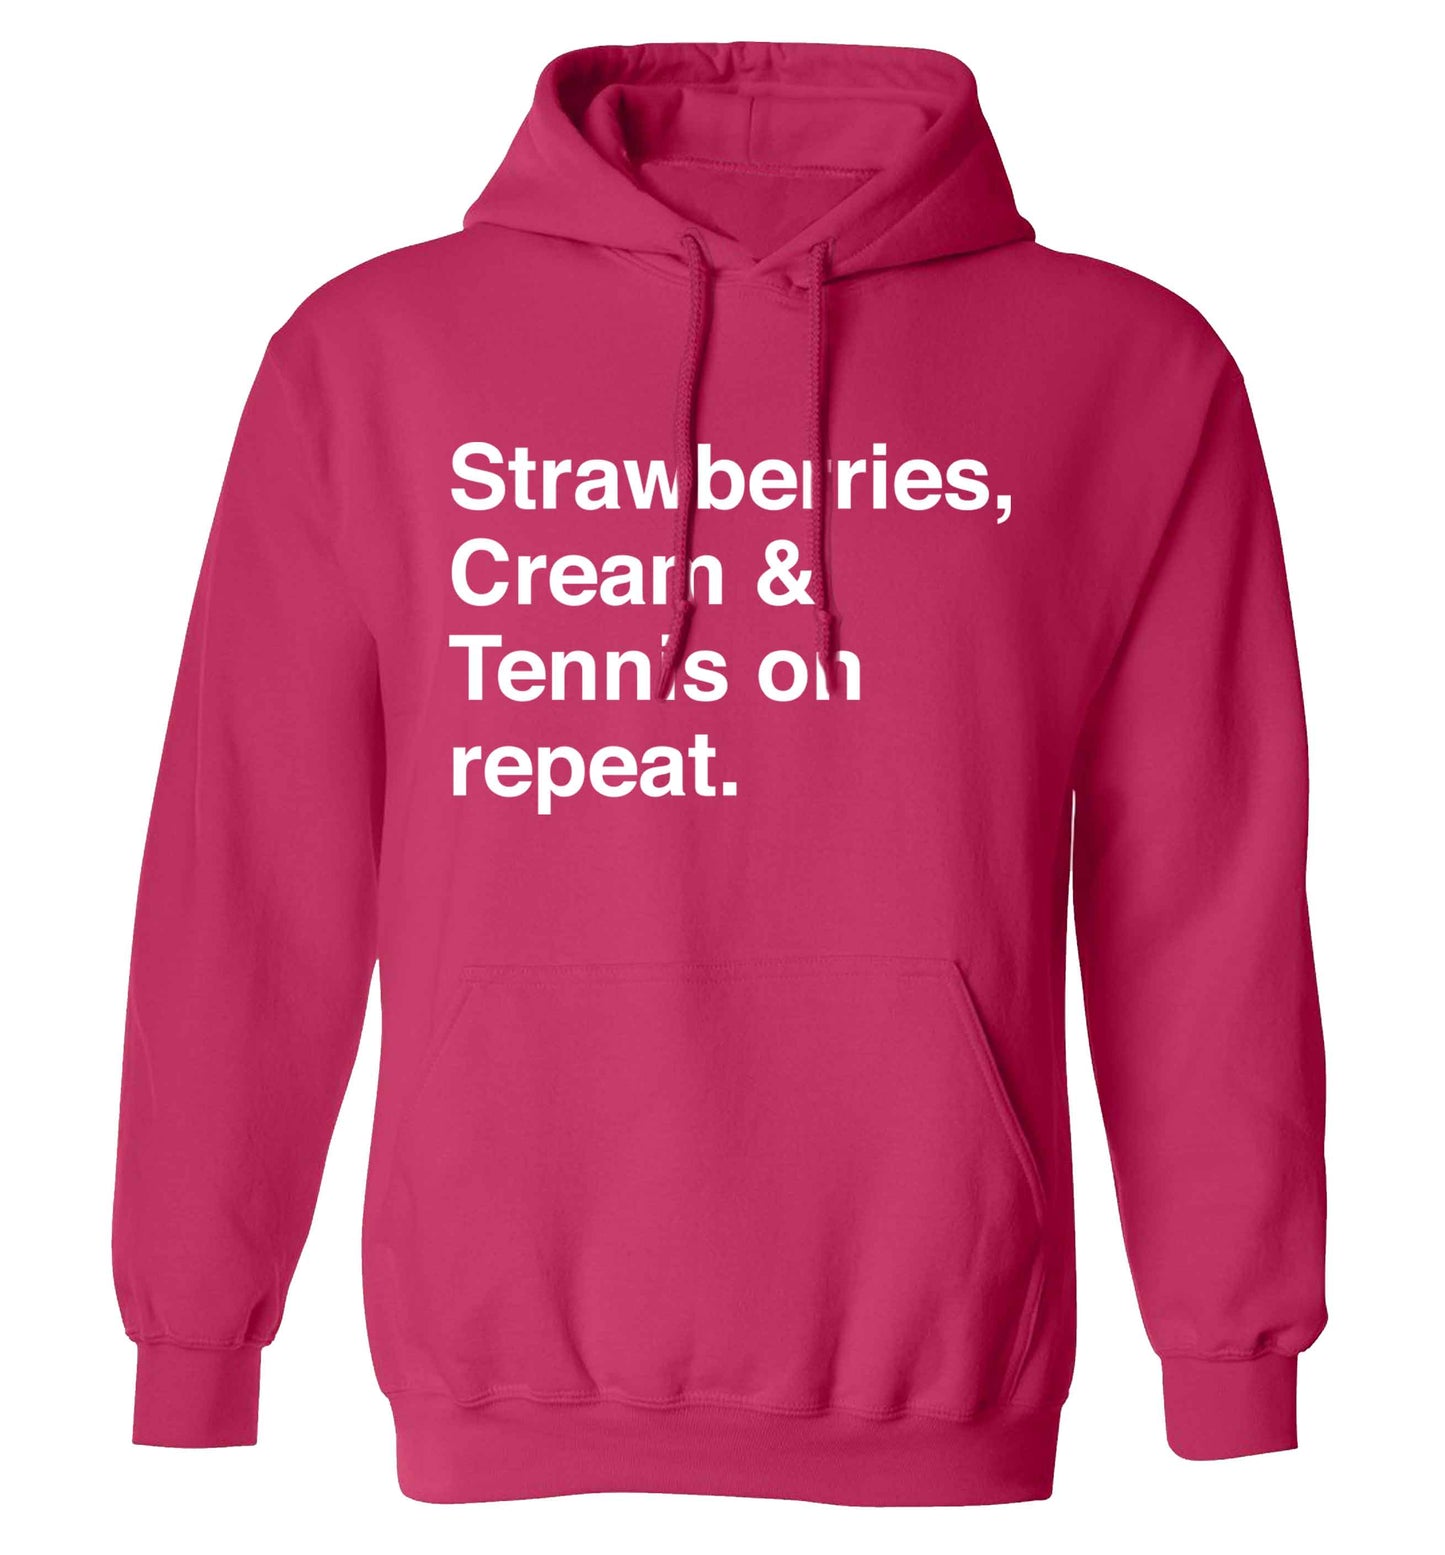 Strawberries, cream and tennis on repeat adults unisex pink hoodie 2XL